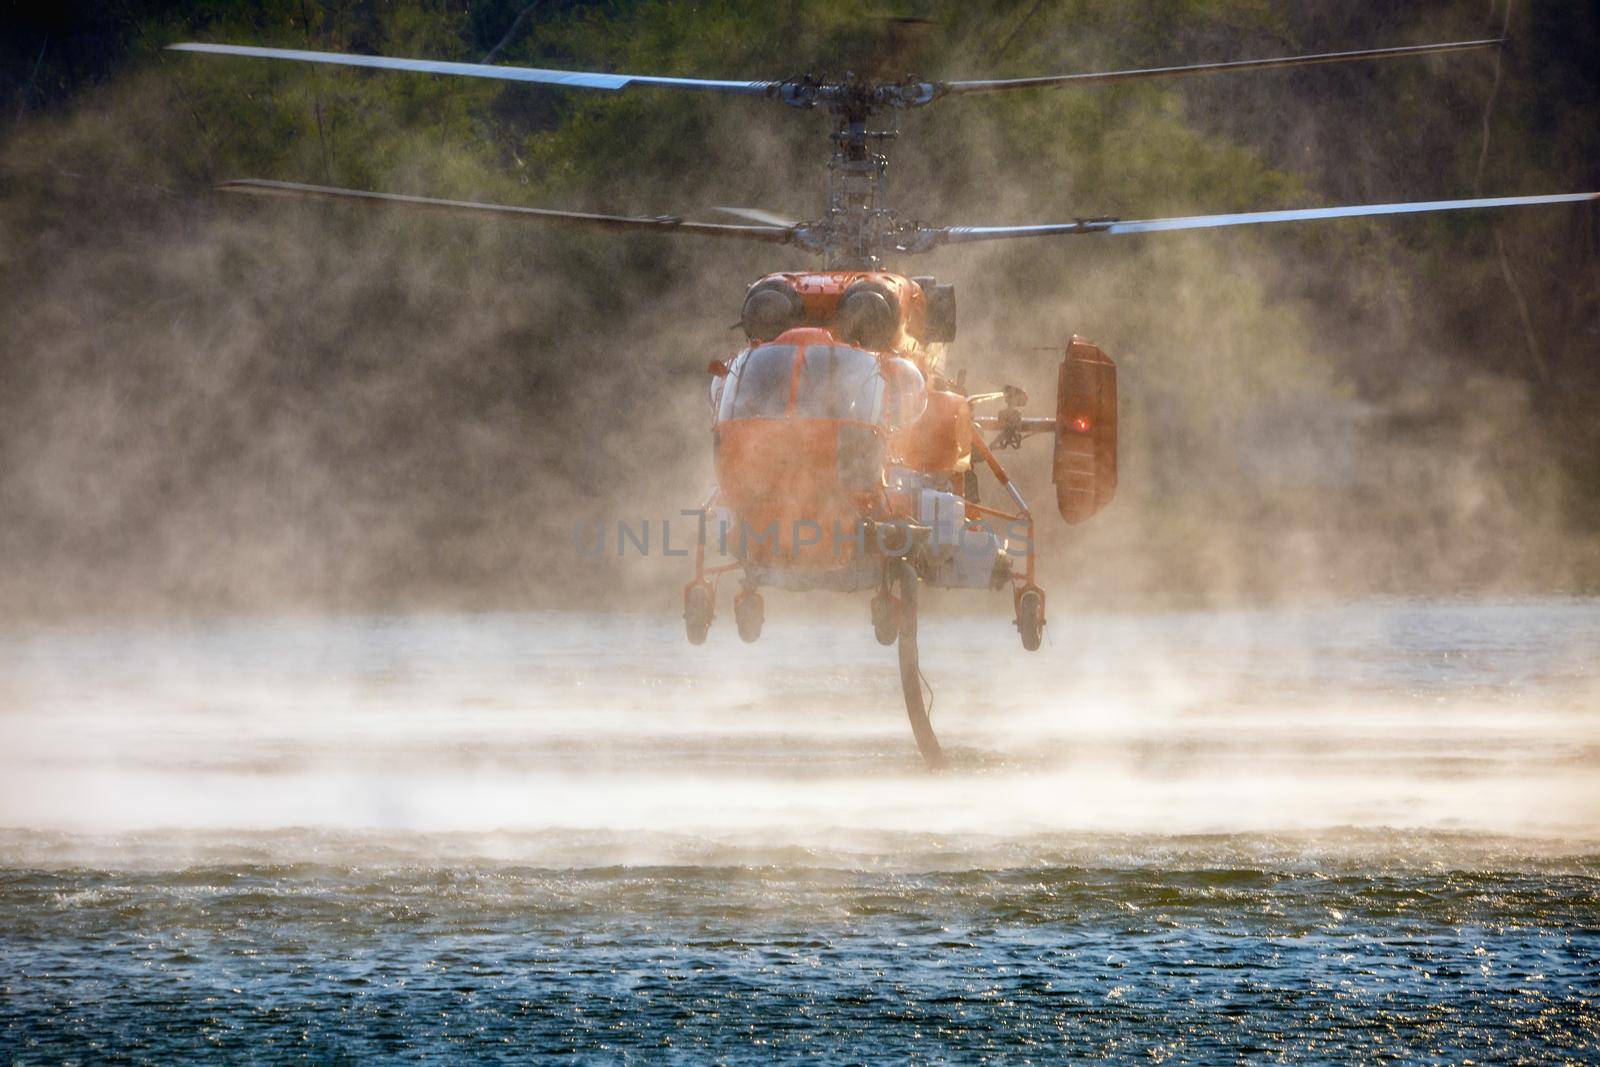 KA-32 Firefighting helicopter is hovering over the pond to refills water